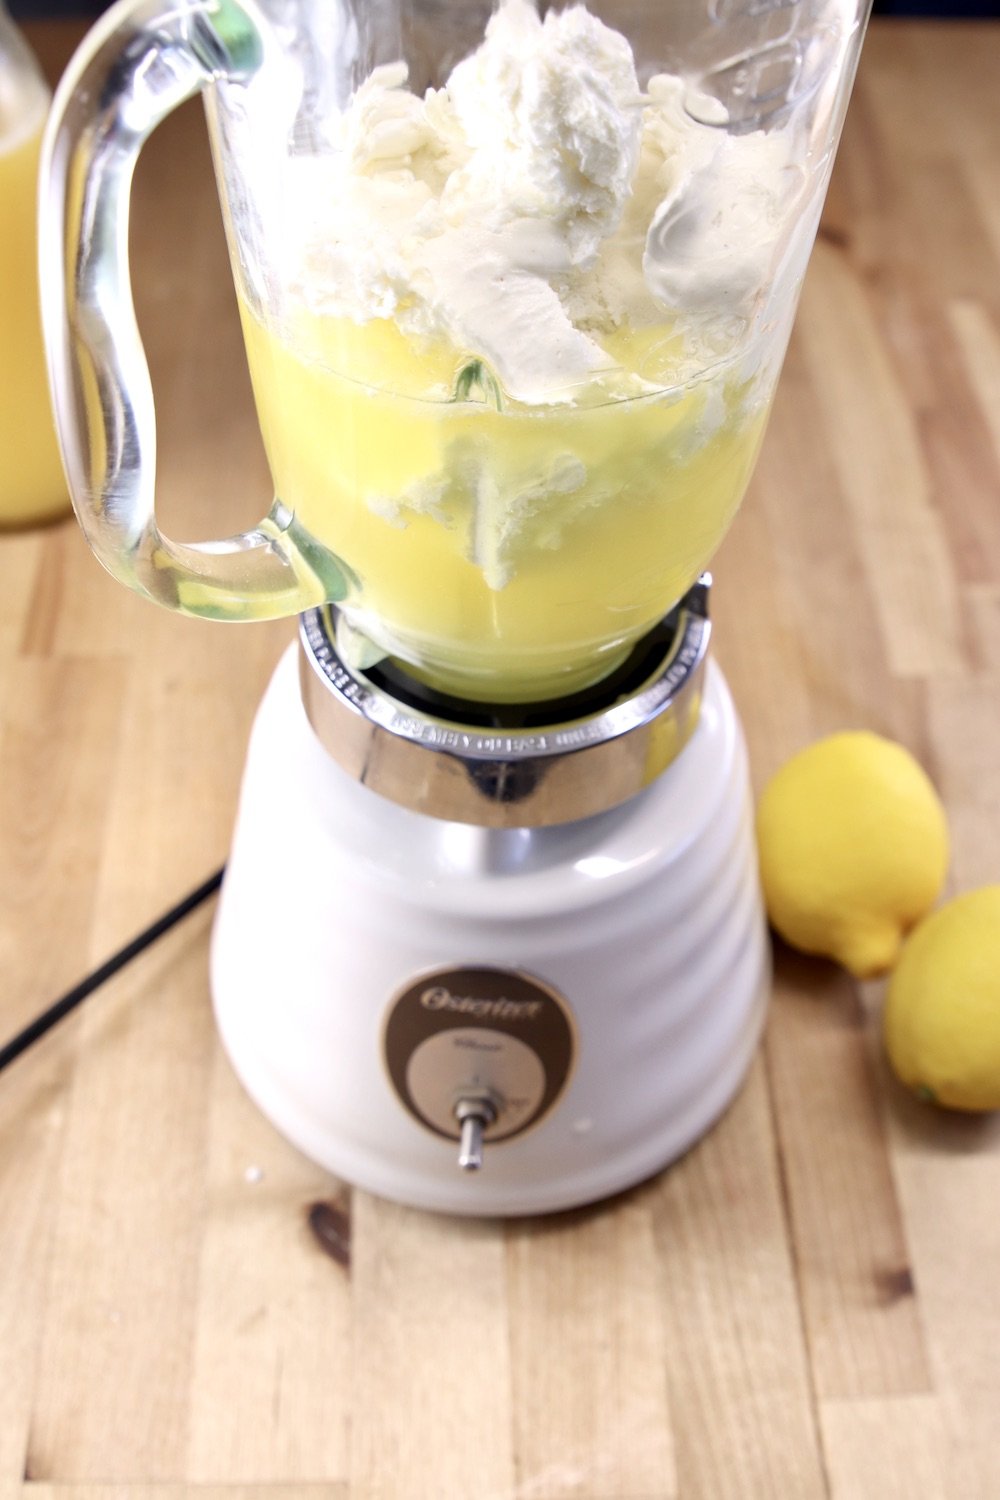 blender with pineapple juice and ice cream